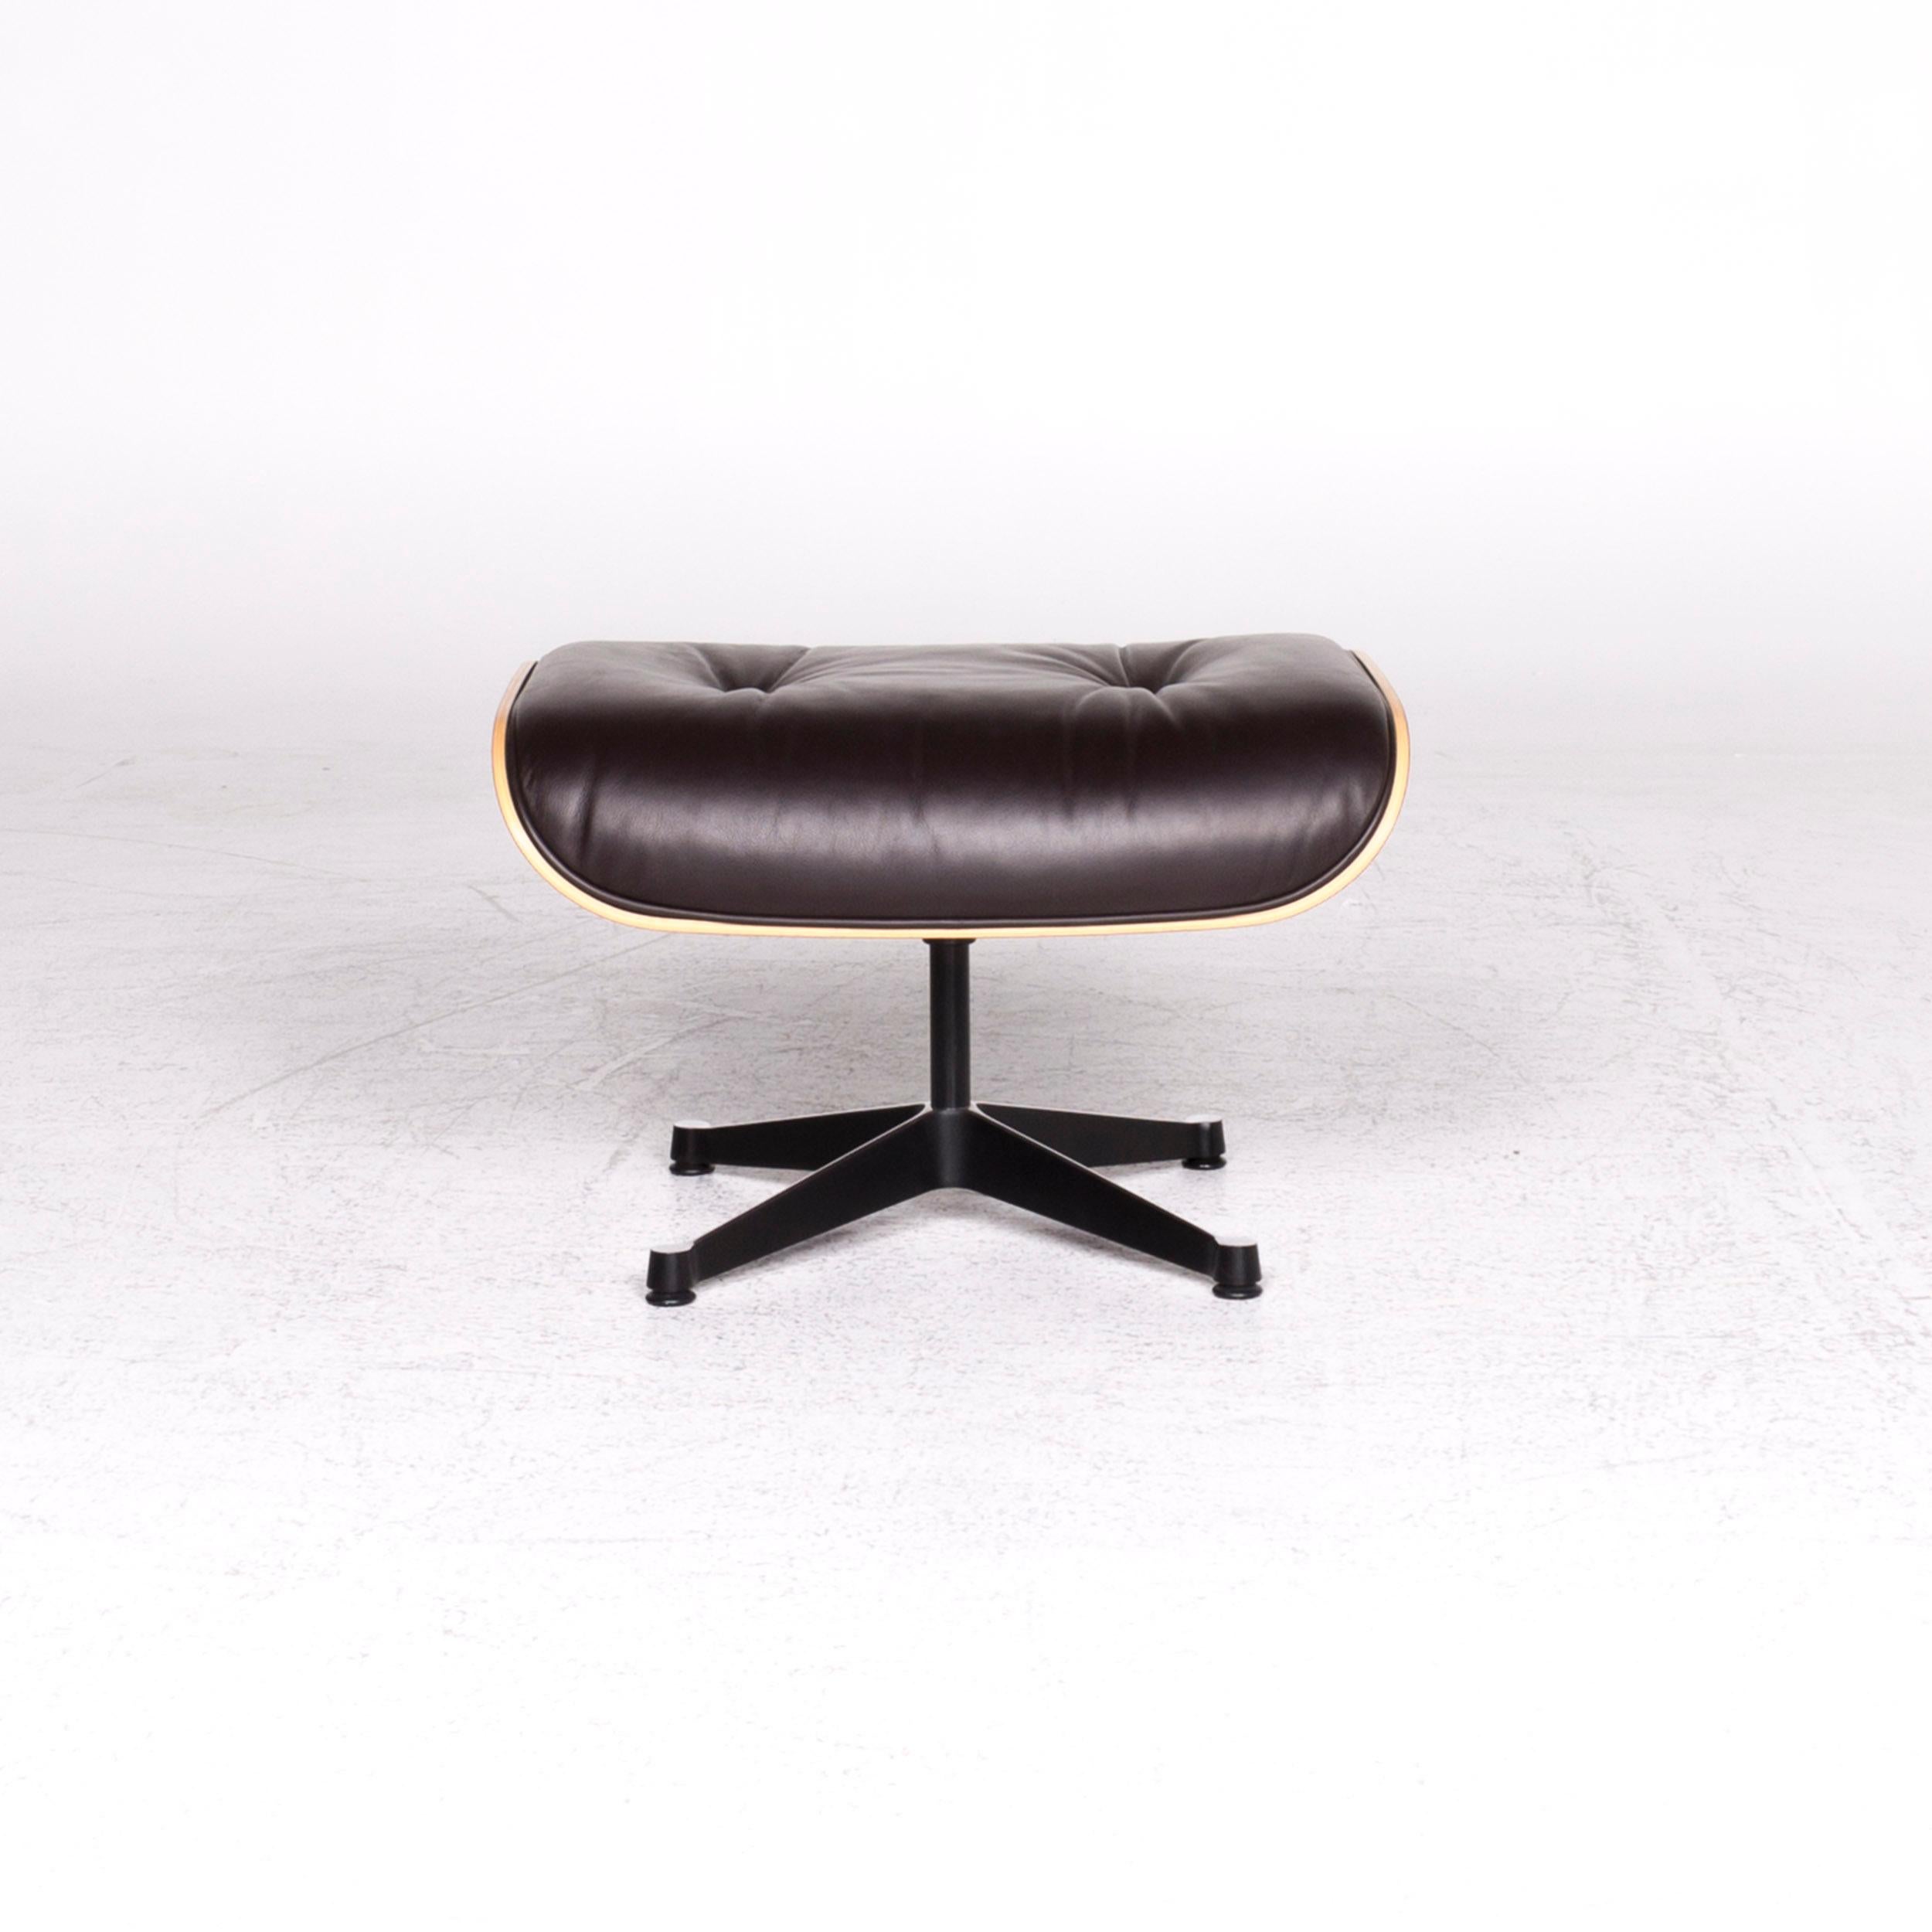 Vitra Eames Lounge Chair Leather Stool Brown Charles & Ray Eames Chair For Sale 5